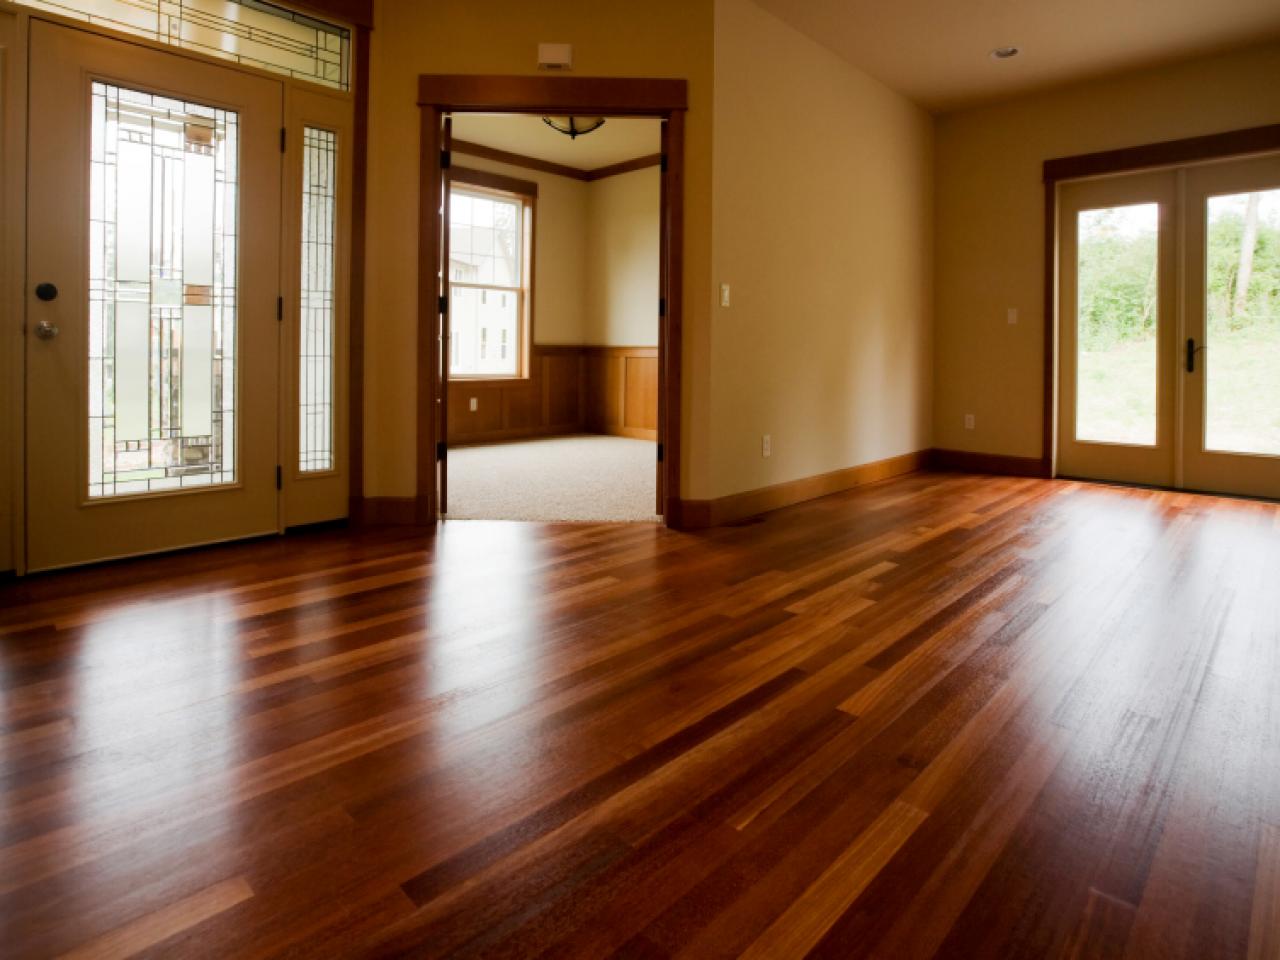 Cleaning Tile Wood And Vinyl Floors, Home Remedies For Cleaning Hardwood Floors